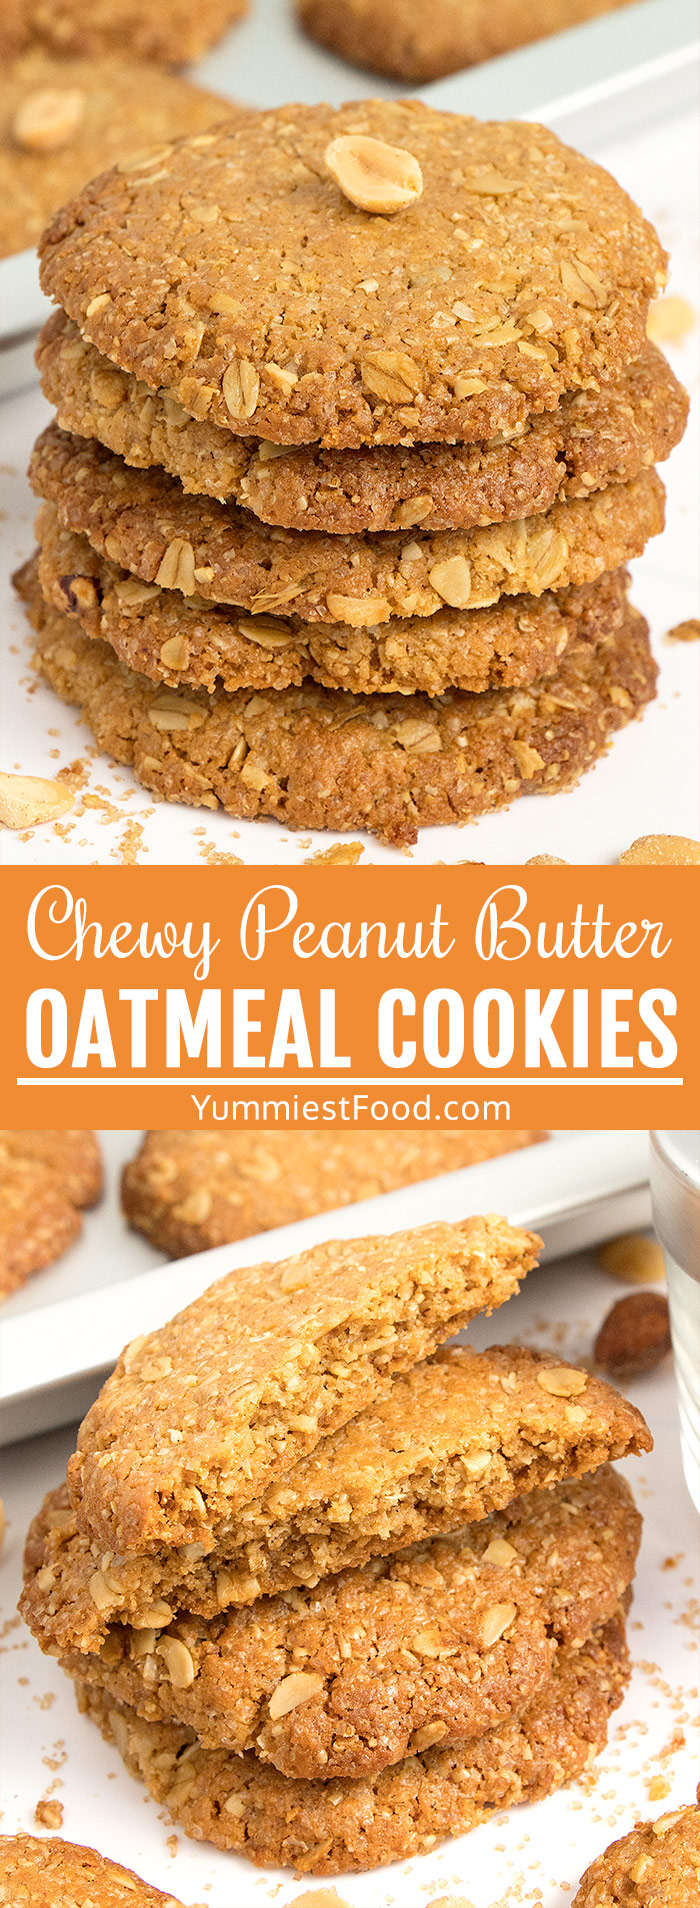 Chewy Peanut Butter Oatmeal Cookies - so tasty, so there’s no doubt why they are favorite among the children